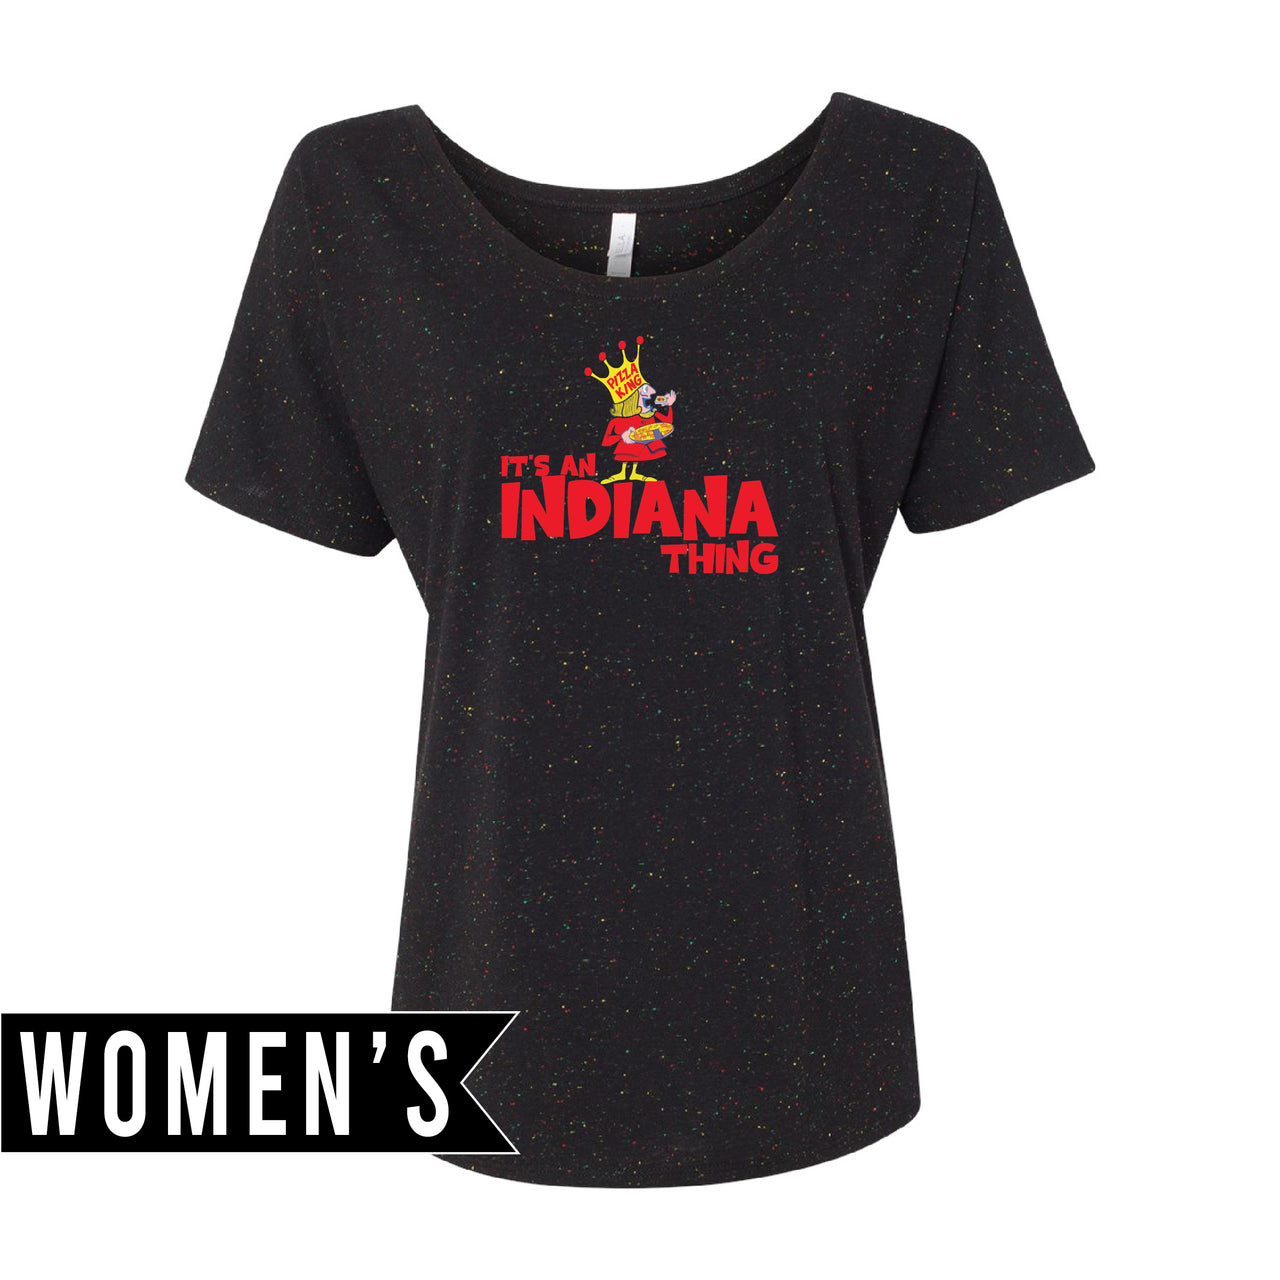 BELLA + CANVAS - Women’s Slouchy Tee - Indiana Pizza